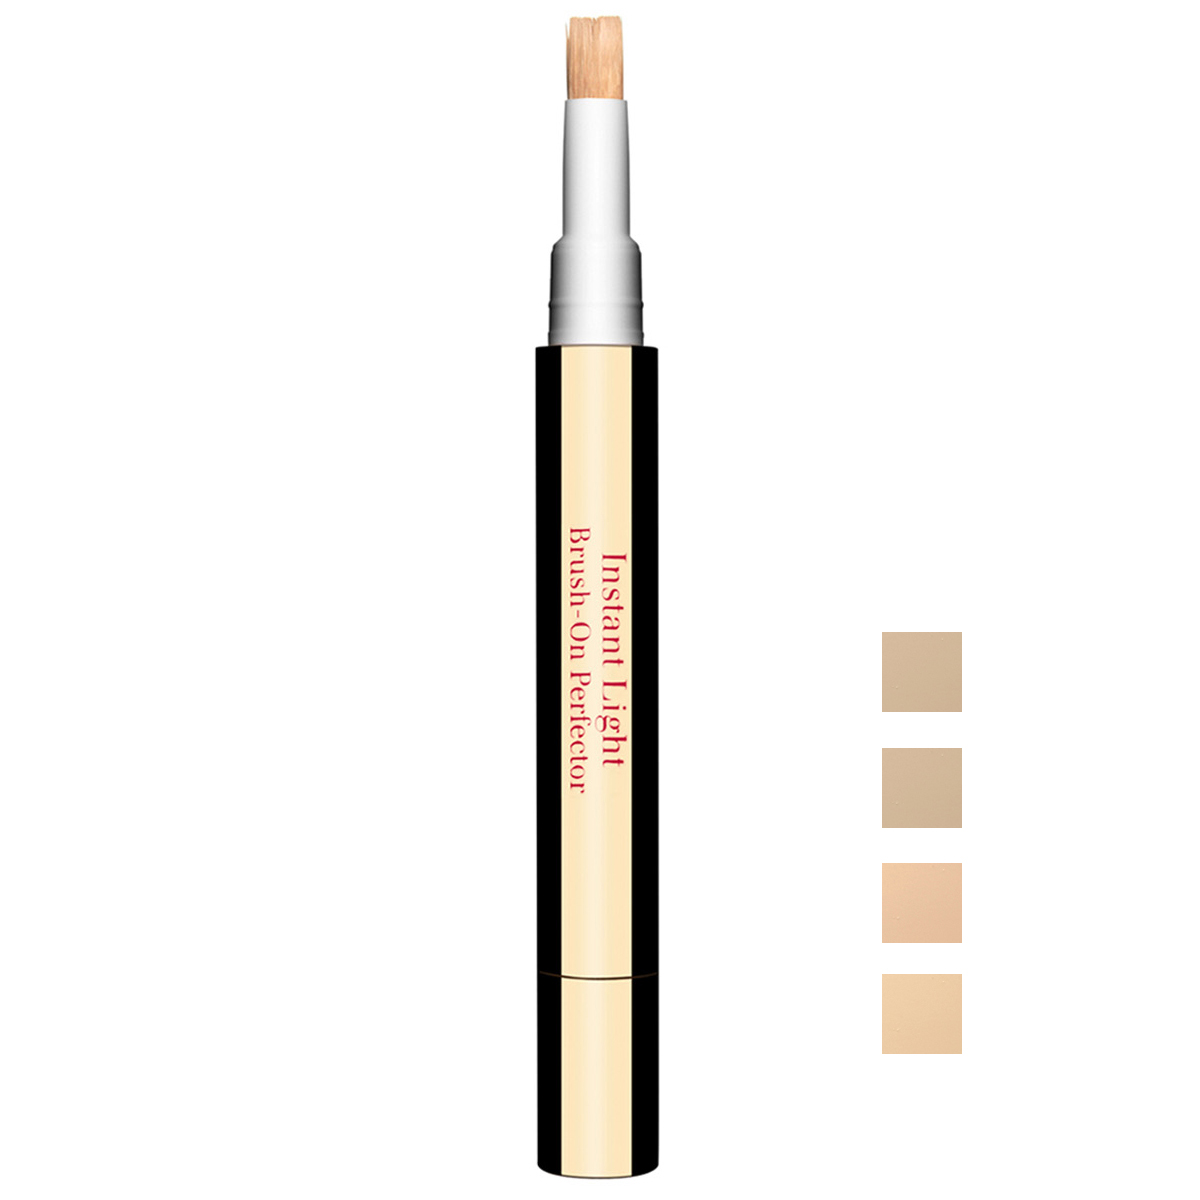 Clarins Instant Light Brush On Perfector